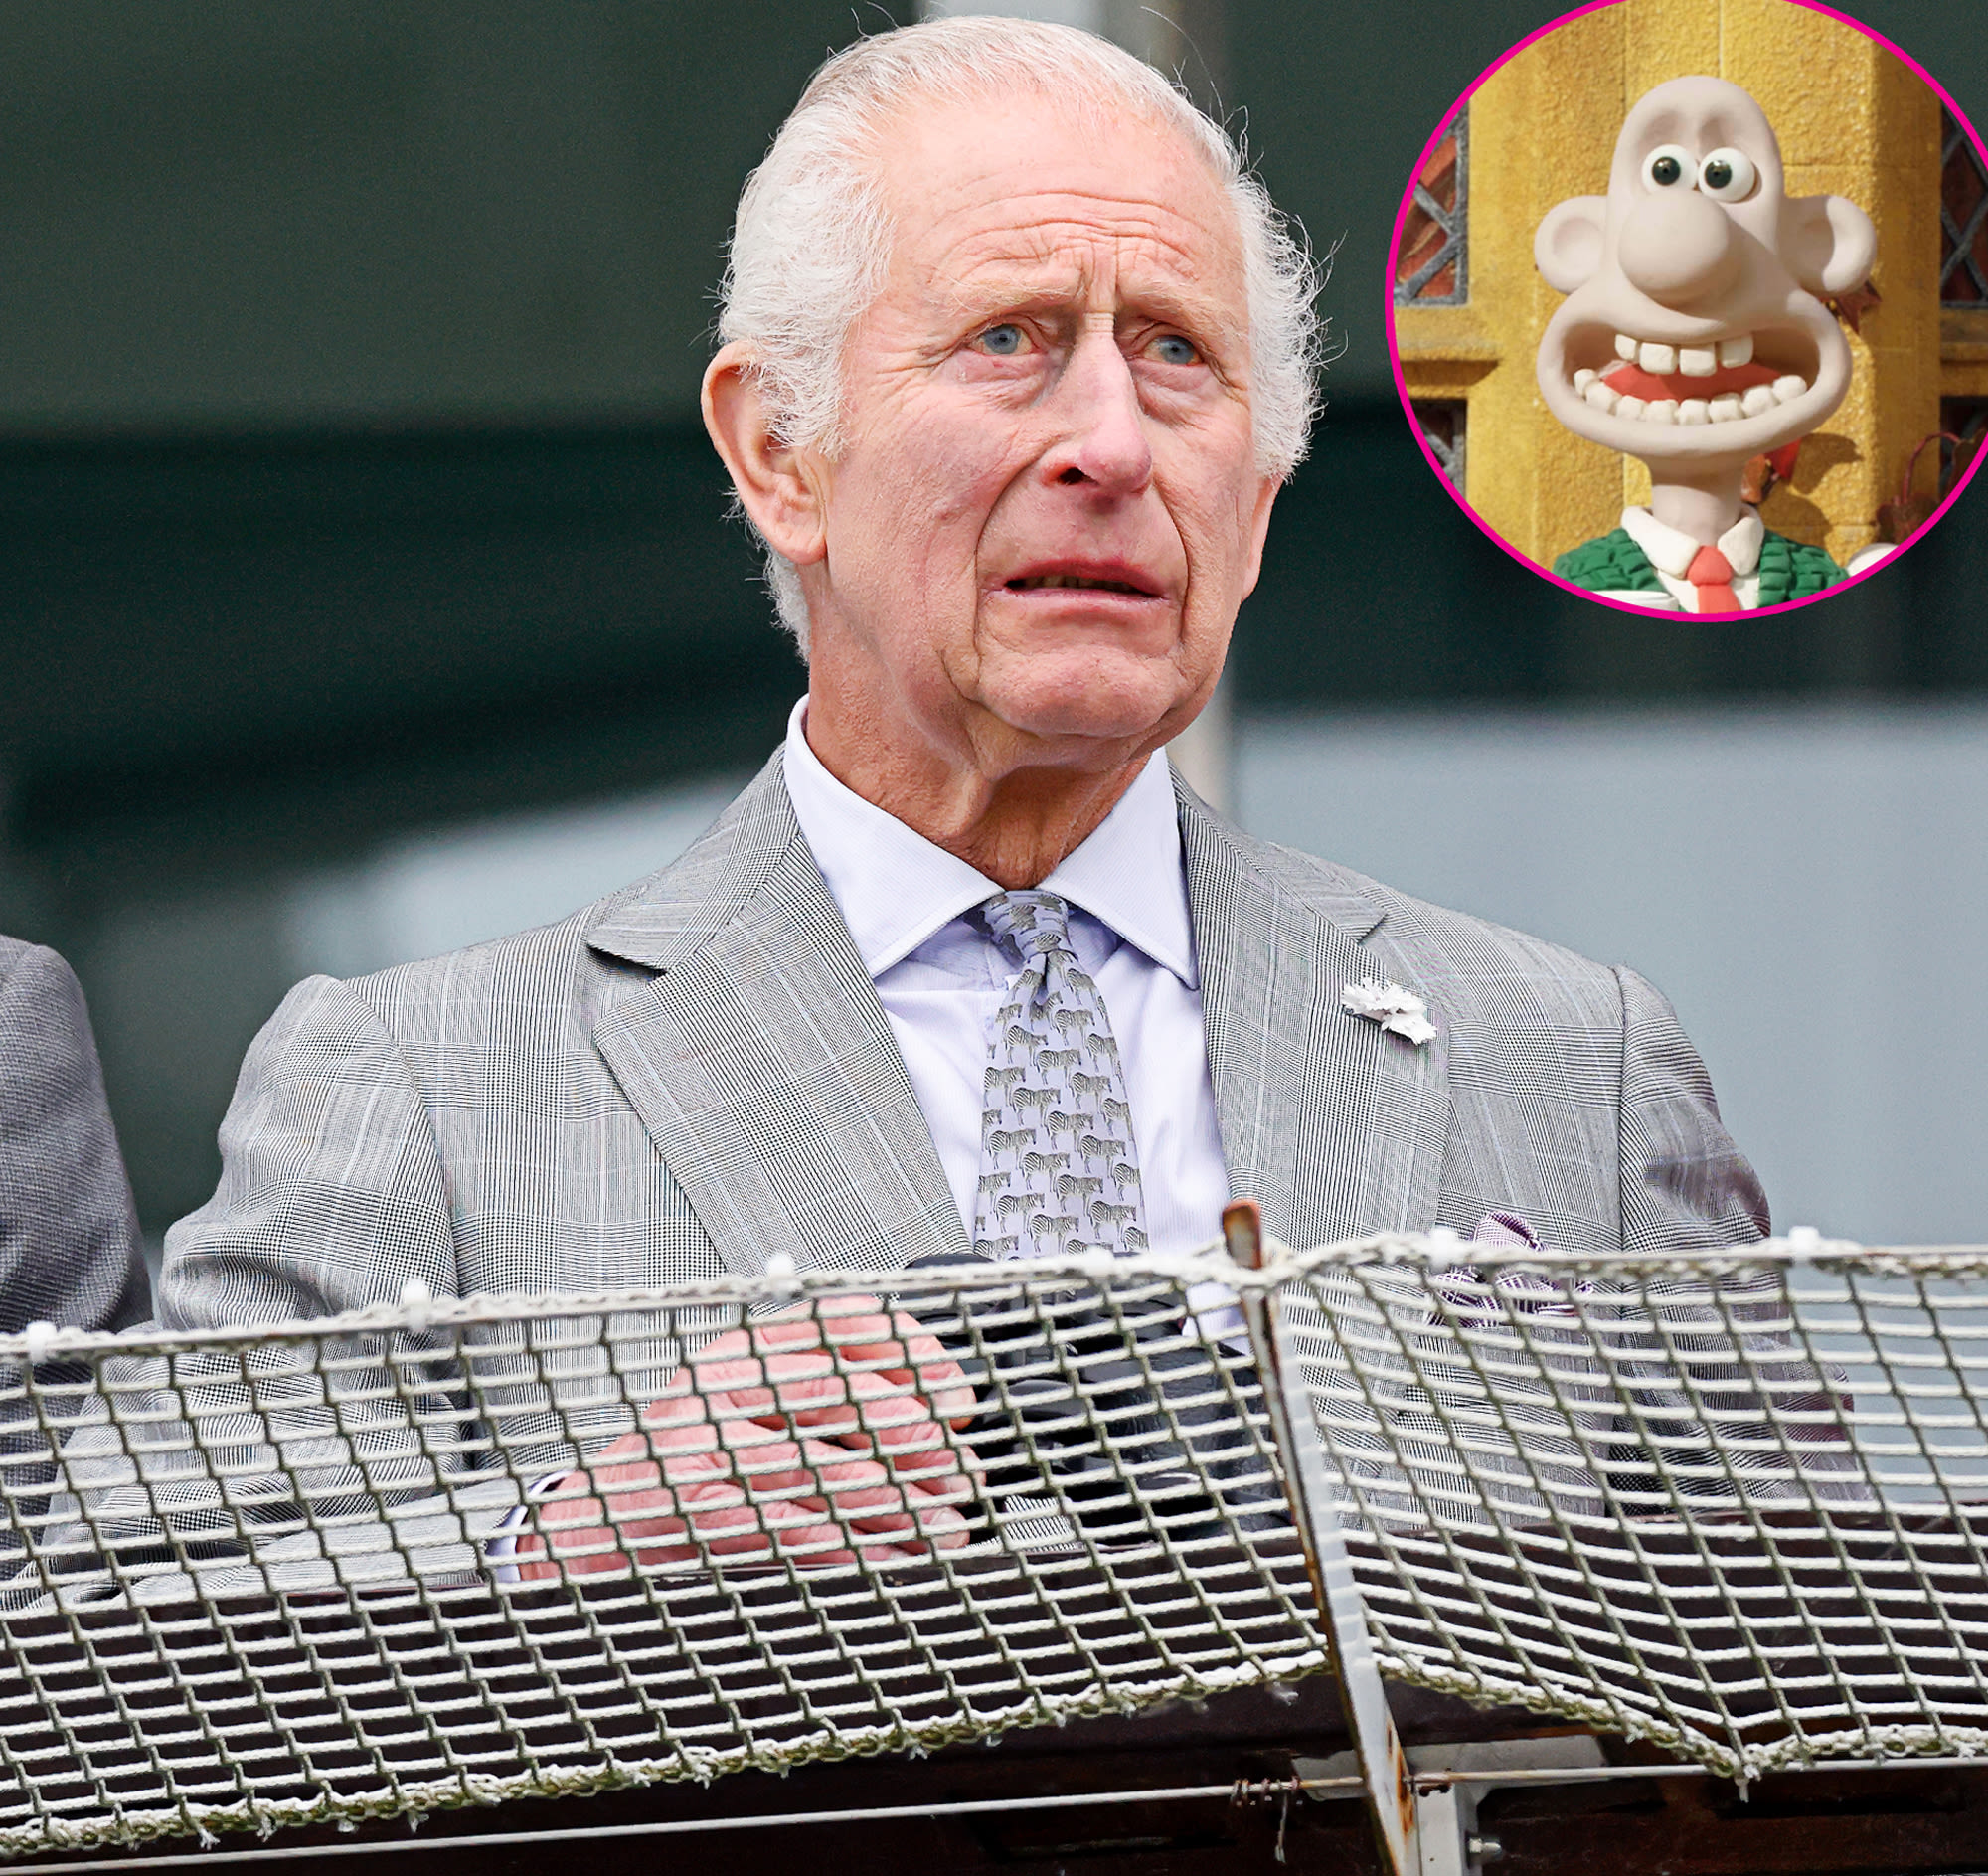 Animal Rights Activists ‘Redecorated’ King Charles’ New Portrait With ‘Wallace and Gromit’ Cartoon